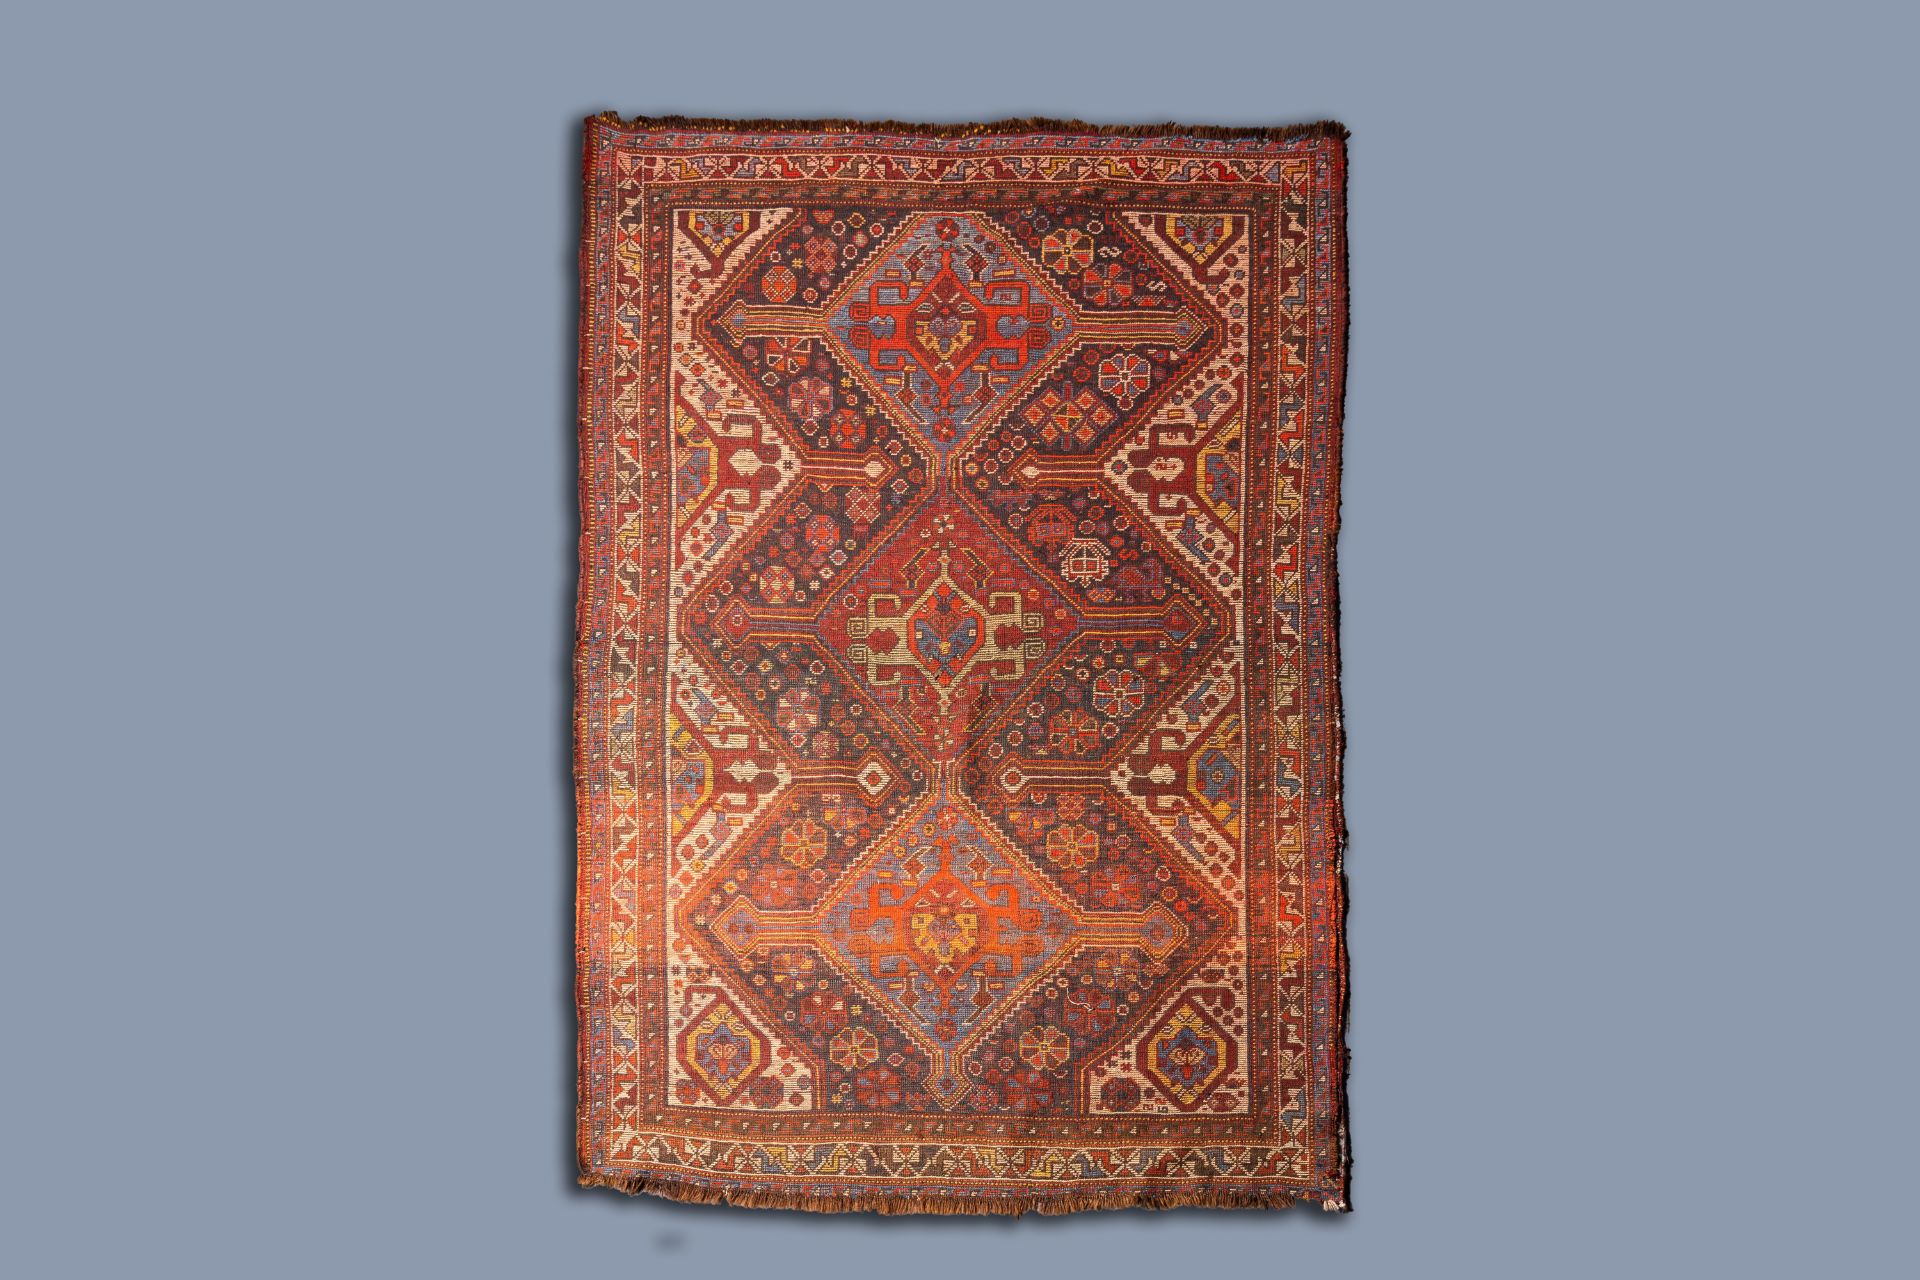 A Caucasian rug with geometric patterns and floral design, wool on cotton, 19th C. - Image 2 of 3